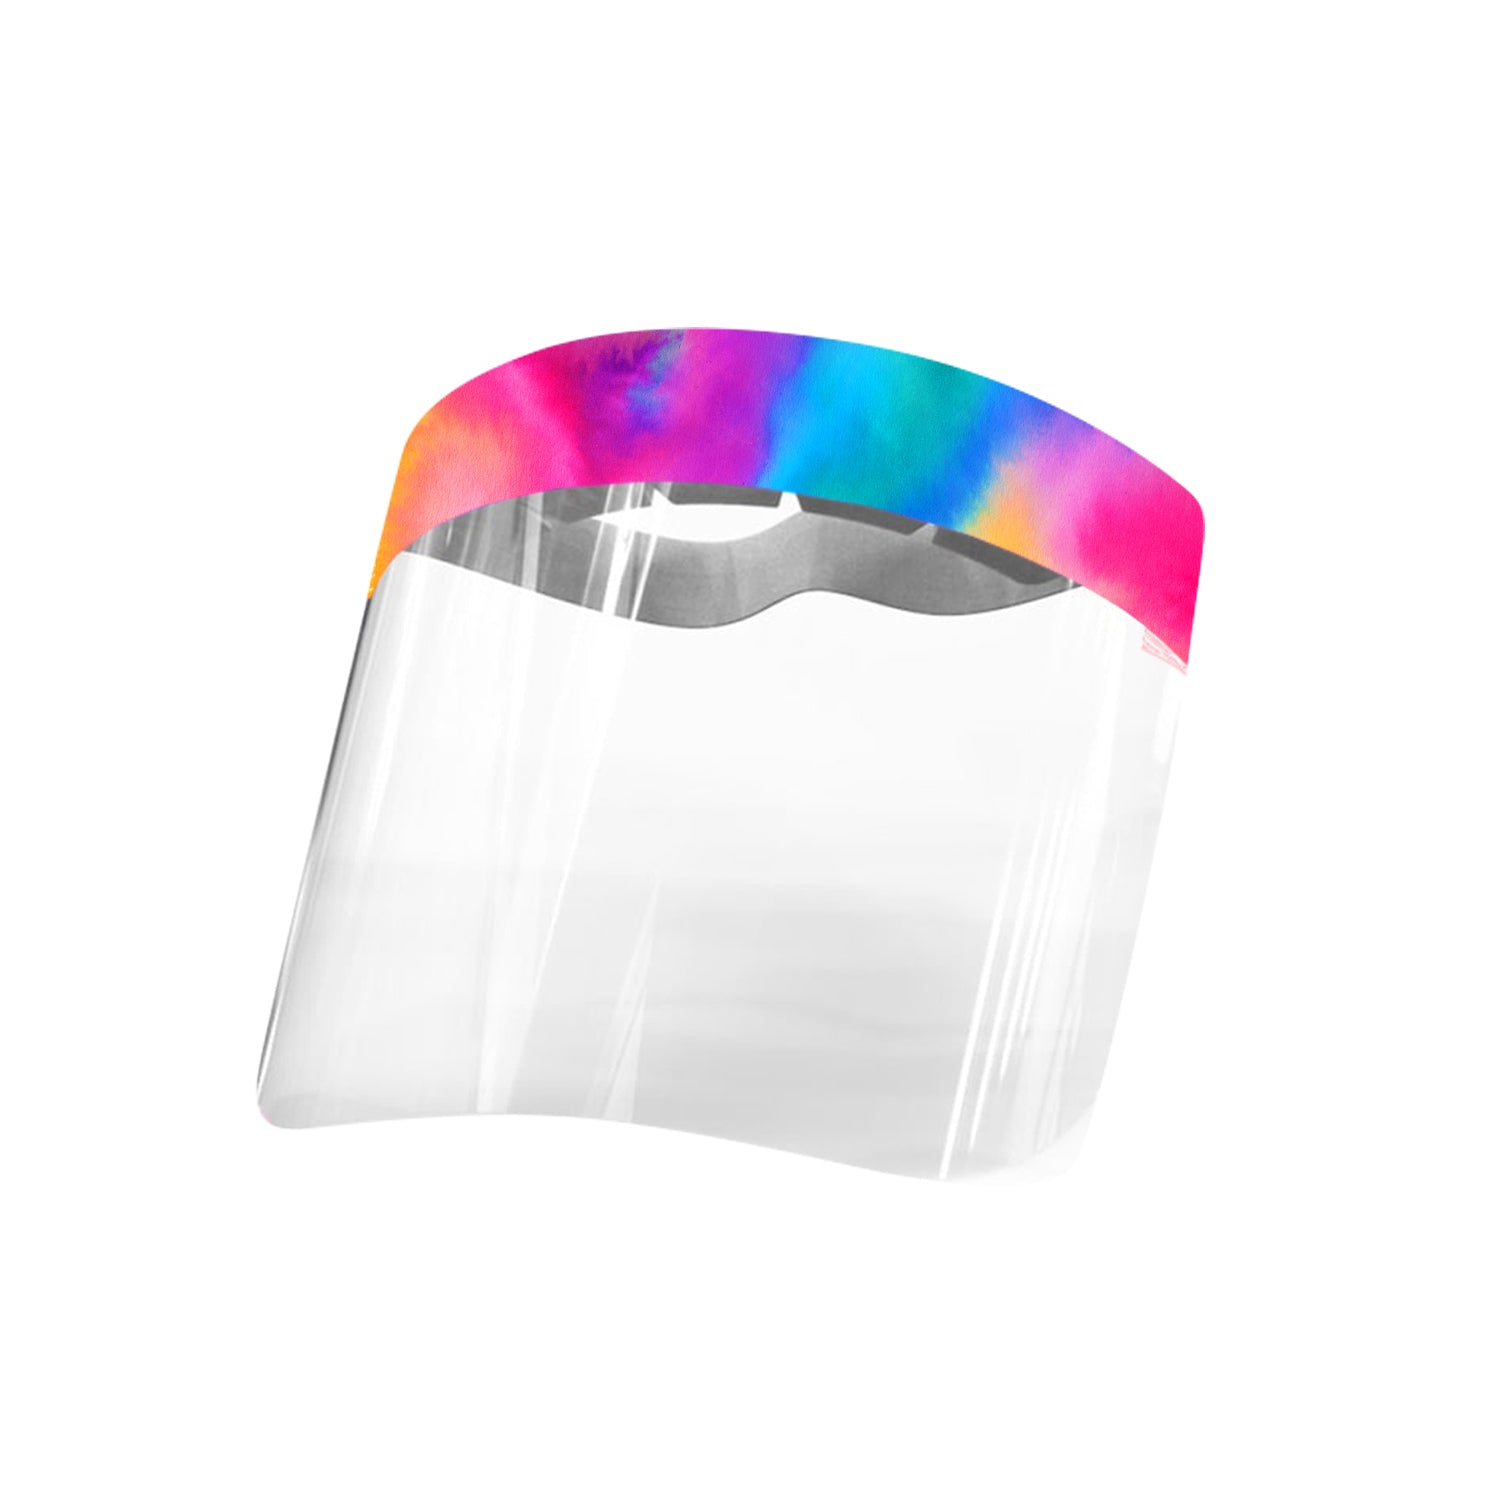 High quality face shields designed to stop any droplets from coughs or sneezes! Keep you and your family protected! Comfortable, Durable, Quality Material. Comes with removable protective liner. Easy To Clean.  Comes with adjustable strap. Crystal clear transparency. Lightweight for tweens, teens and young adults. Tie-dye design.